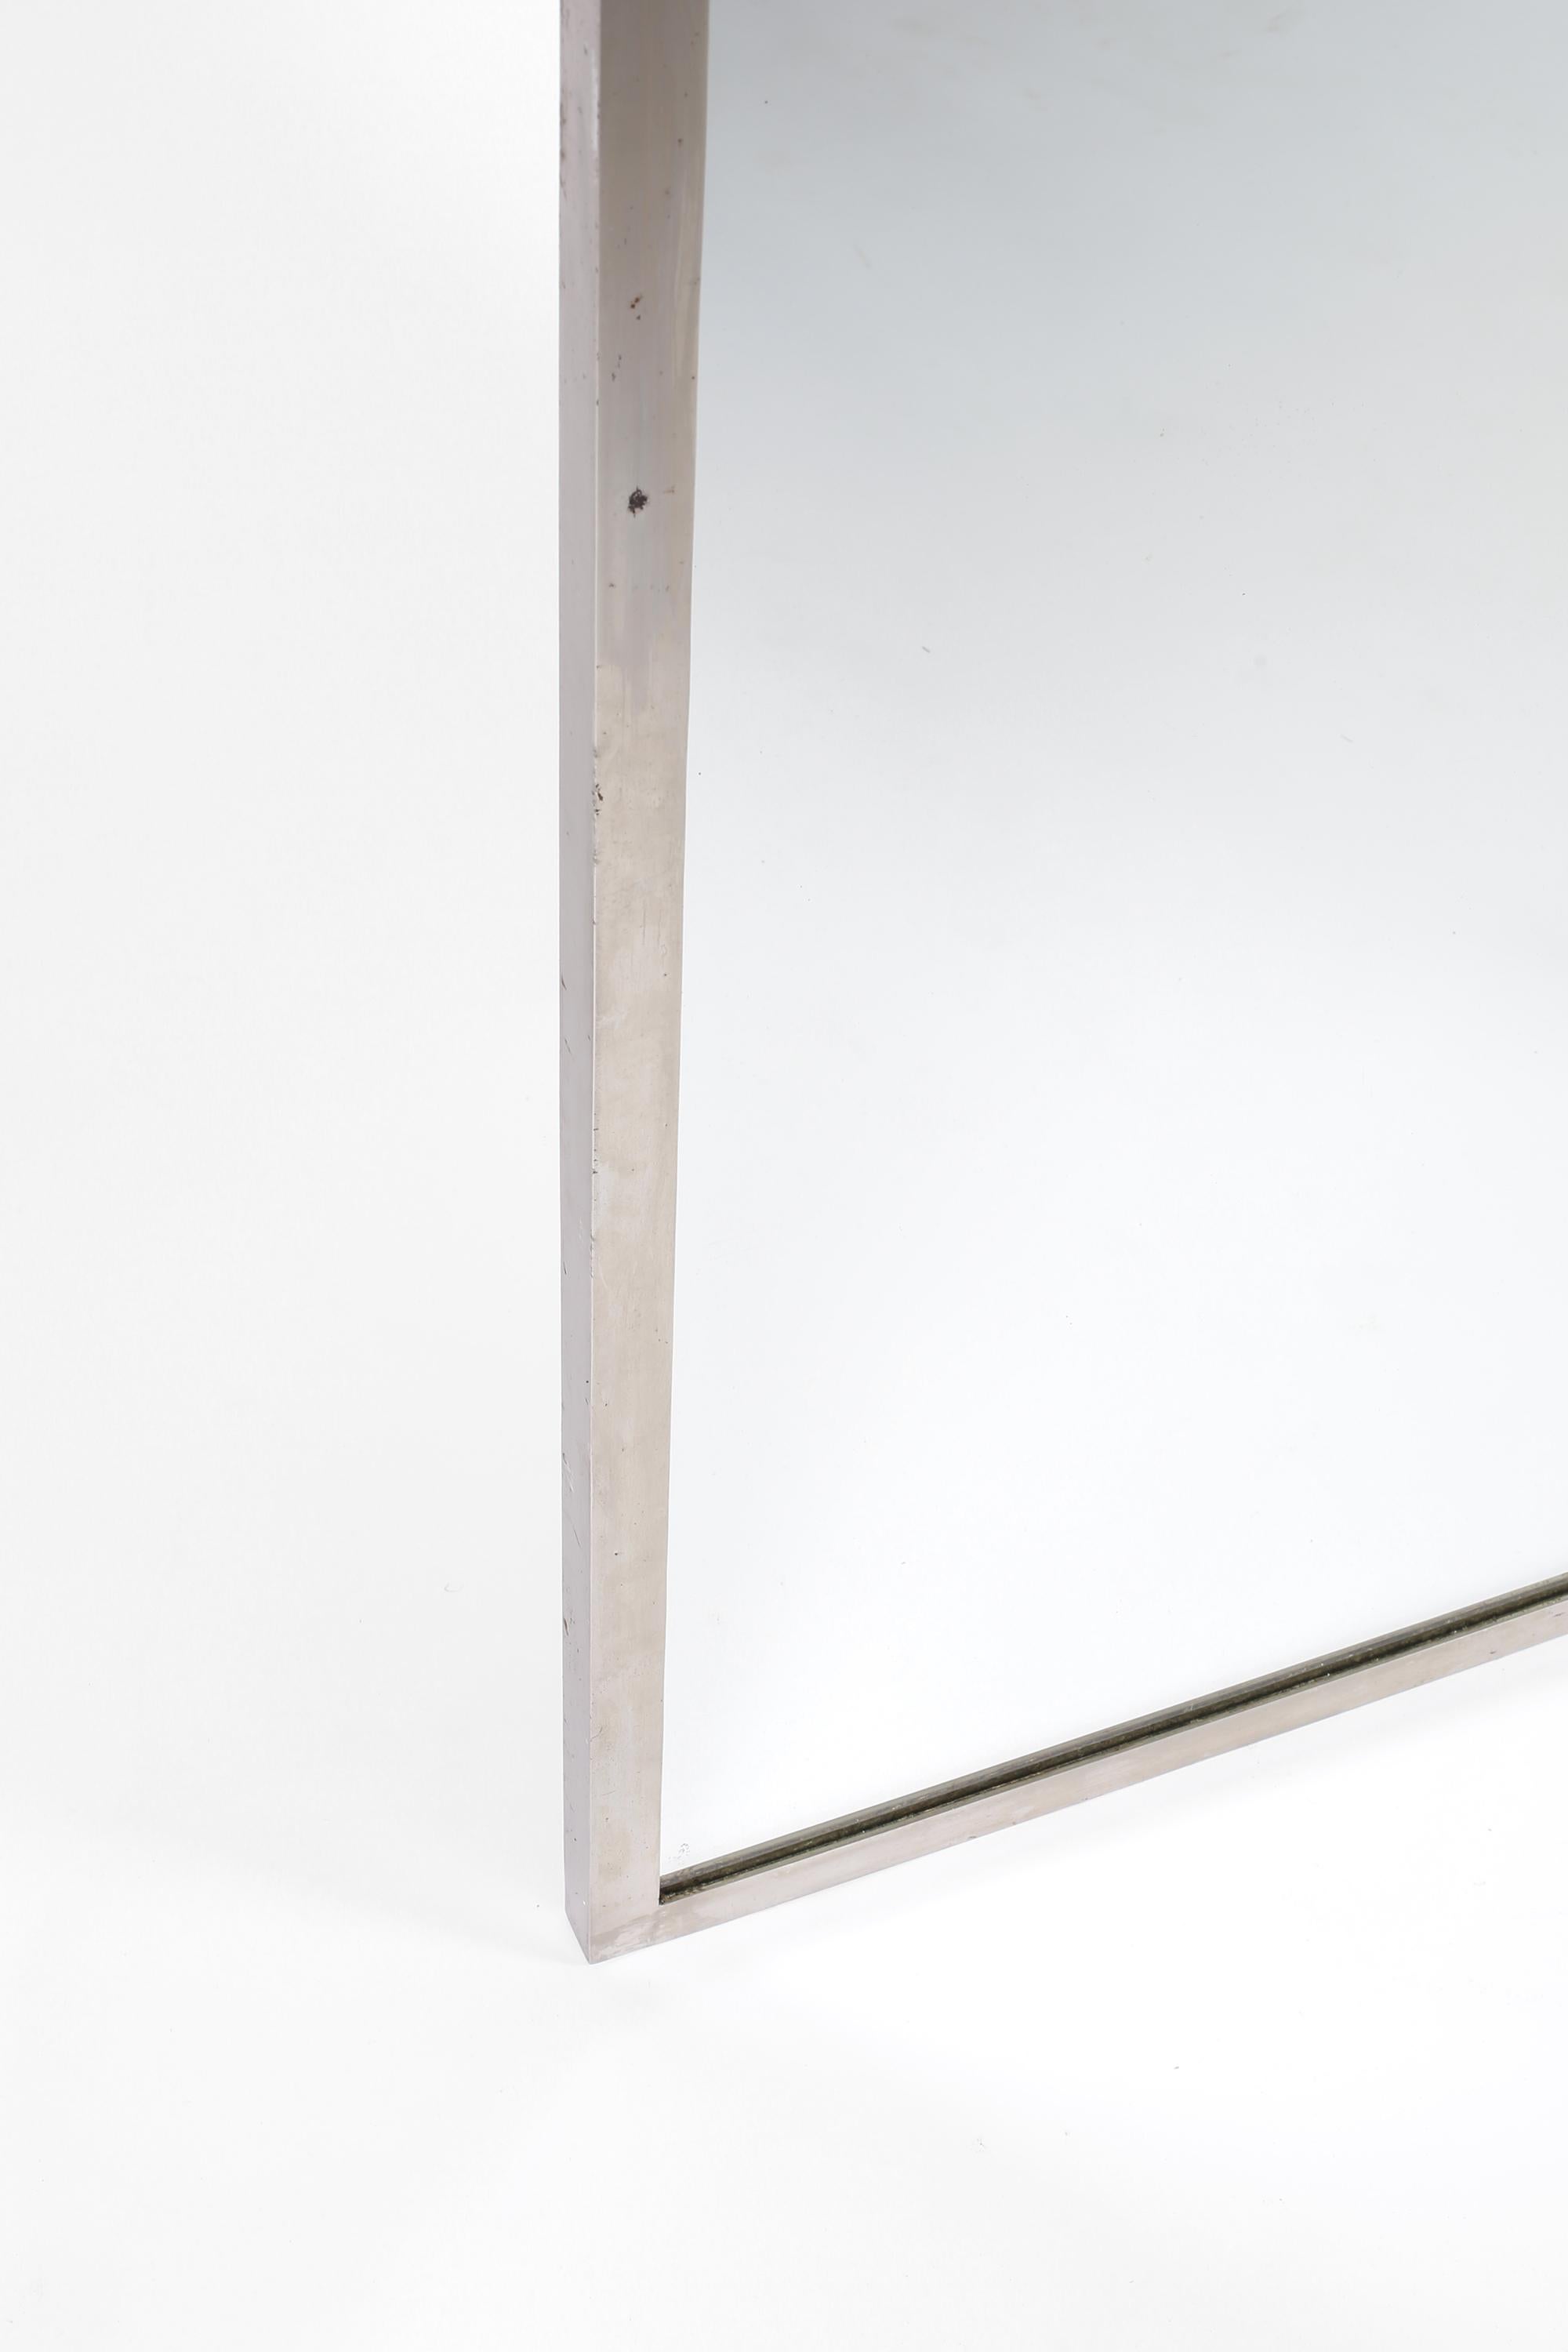 French 1930s Modernist Nickel-Plated Maison Desny Mirror For Sale 6